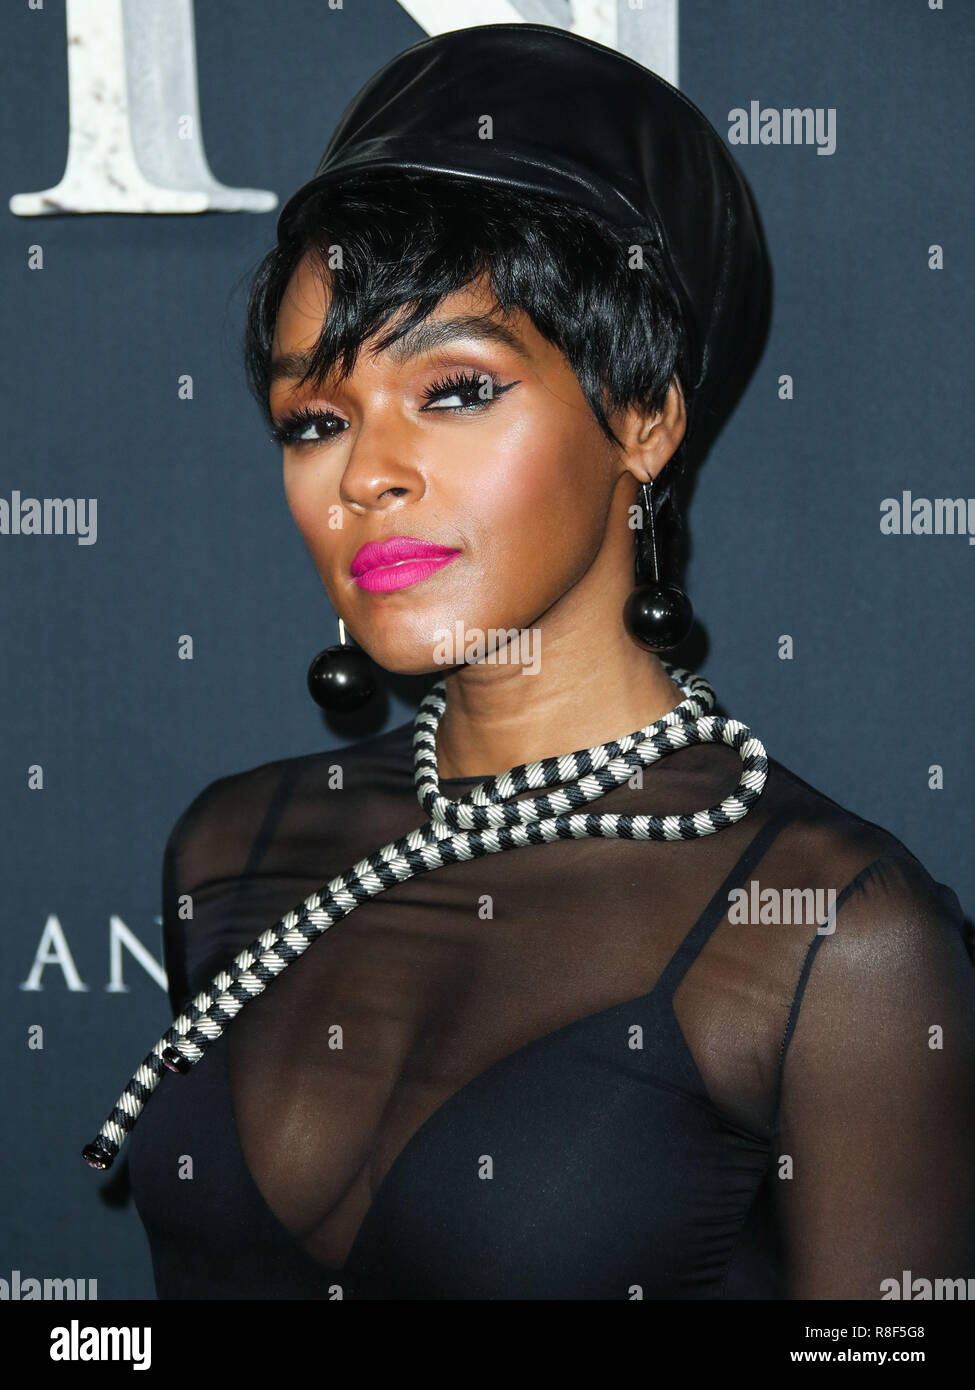 WESTWOOD, LOS ANGELES, CA, USA - FEBRUARY 13: Janelle Monae at the Los Angeles Premiere Of Paramount Pictures' 'Annihilation' held at the Regency Village Theatre on February 13, 2018 in Westwood, Los Angeles, California, United States. (Photo by Xavier Collin/Image Press Agency) Stock Photo